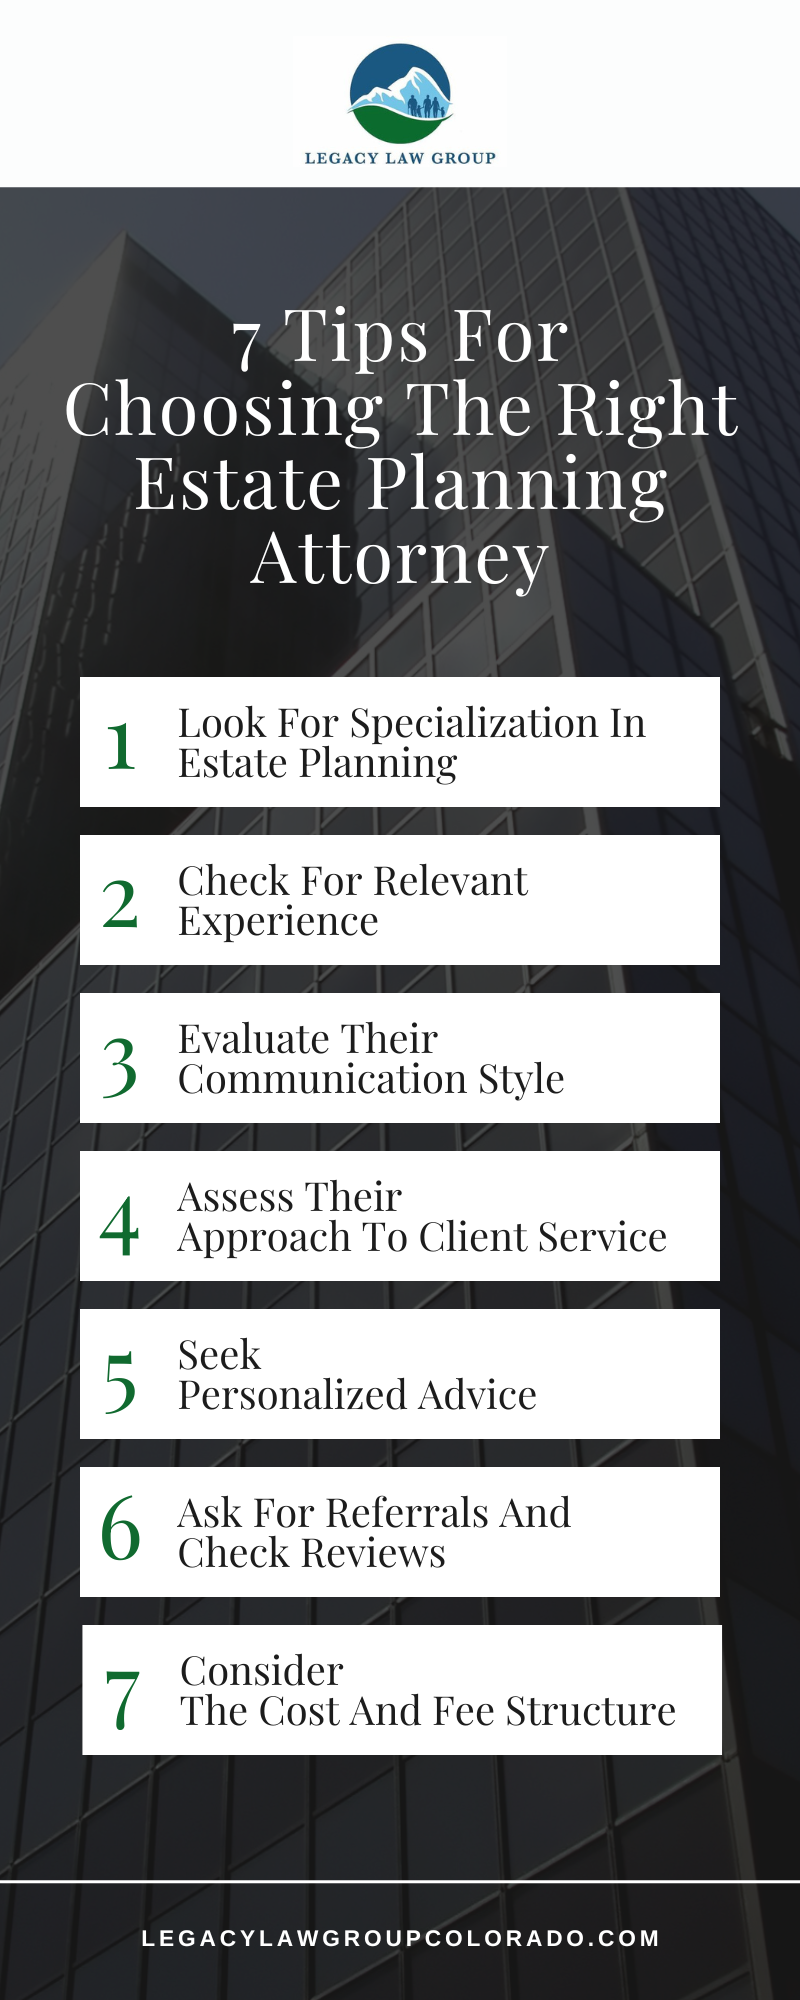 7 Tips For Choosing The Right Estate Planning Attorney Infographic